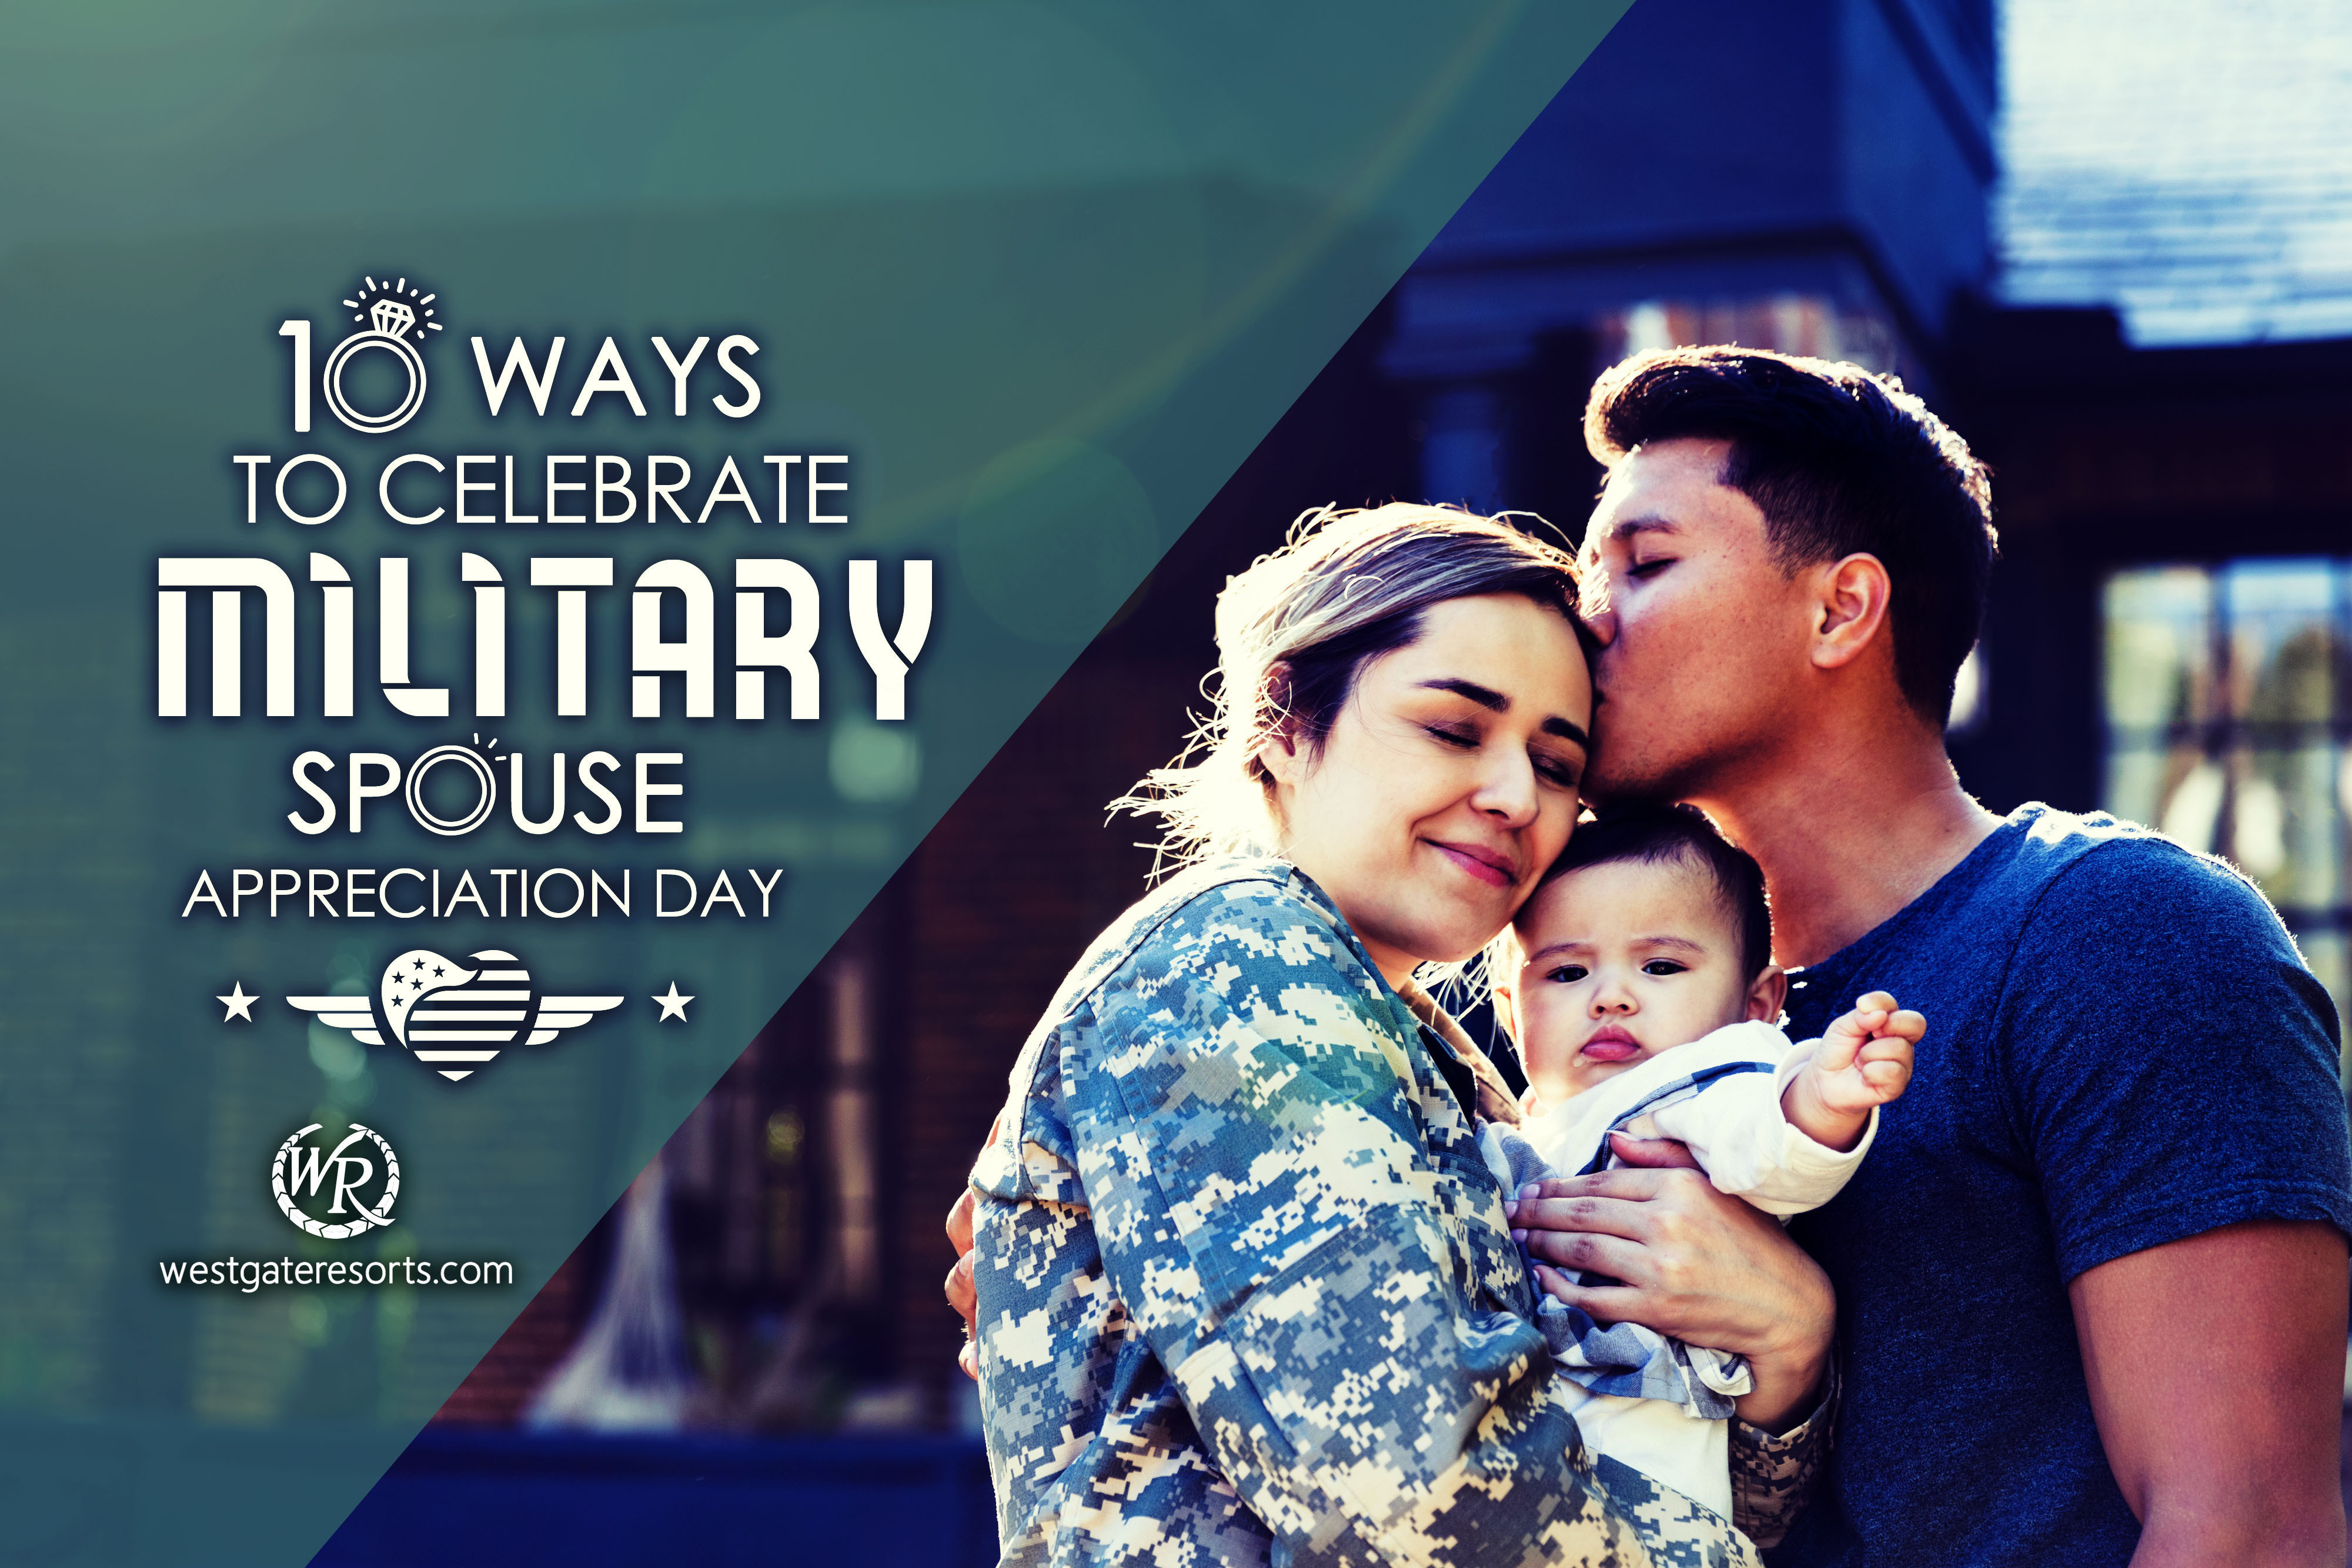 10 Ways to Celebrate Military Spouse Appreciation Day With Your Special Someone